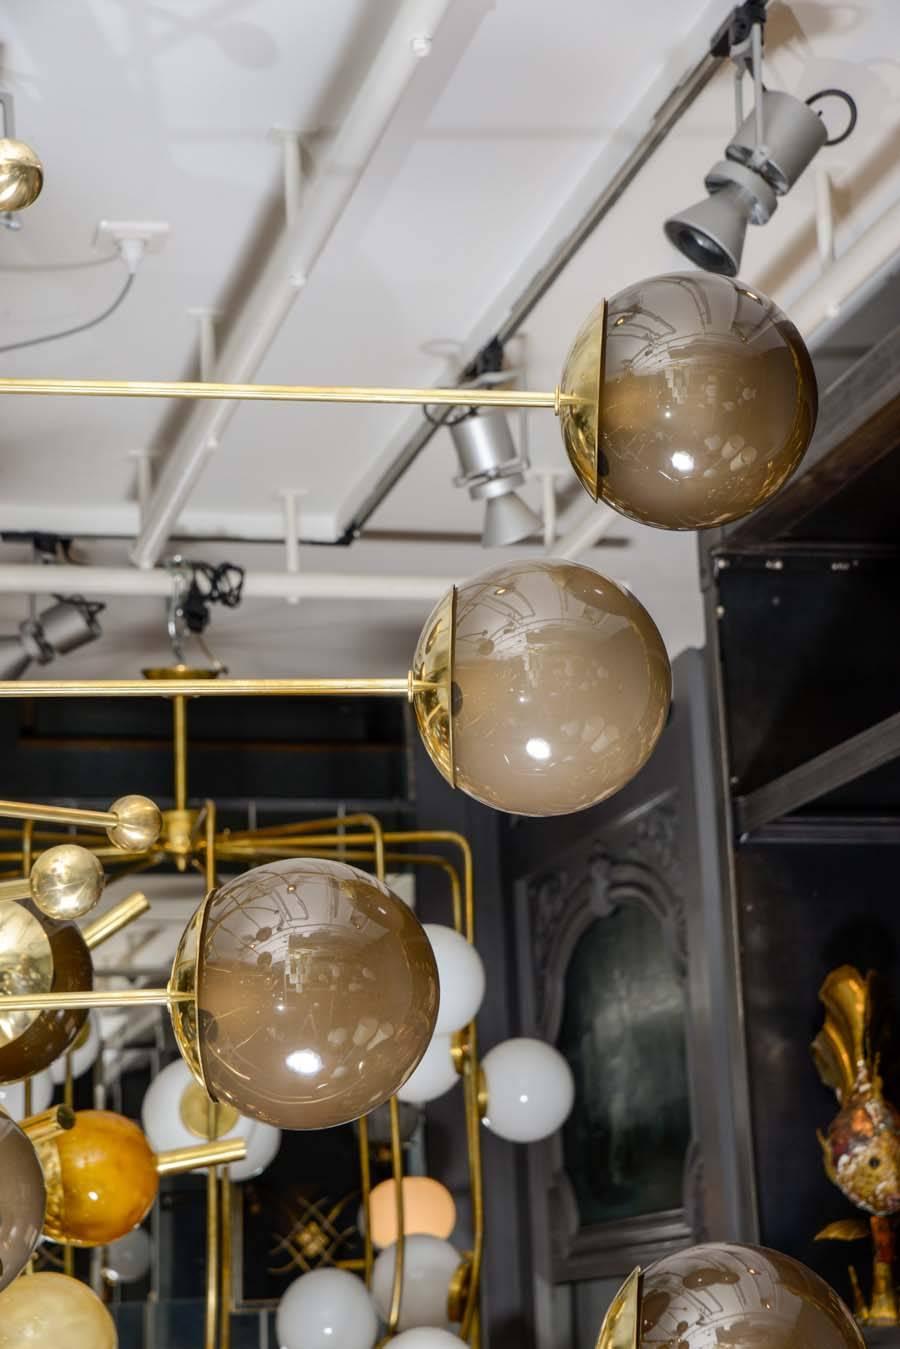 Vertical chandelier made of a brass body from where start 20 arms of light of different lengths giving the illusion of a spiral.
Each of the arms ends with a large Murano glass brown globe.
Between the arms you can find decorative stems ending in